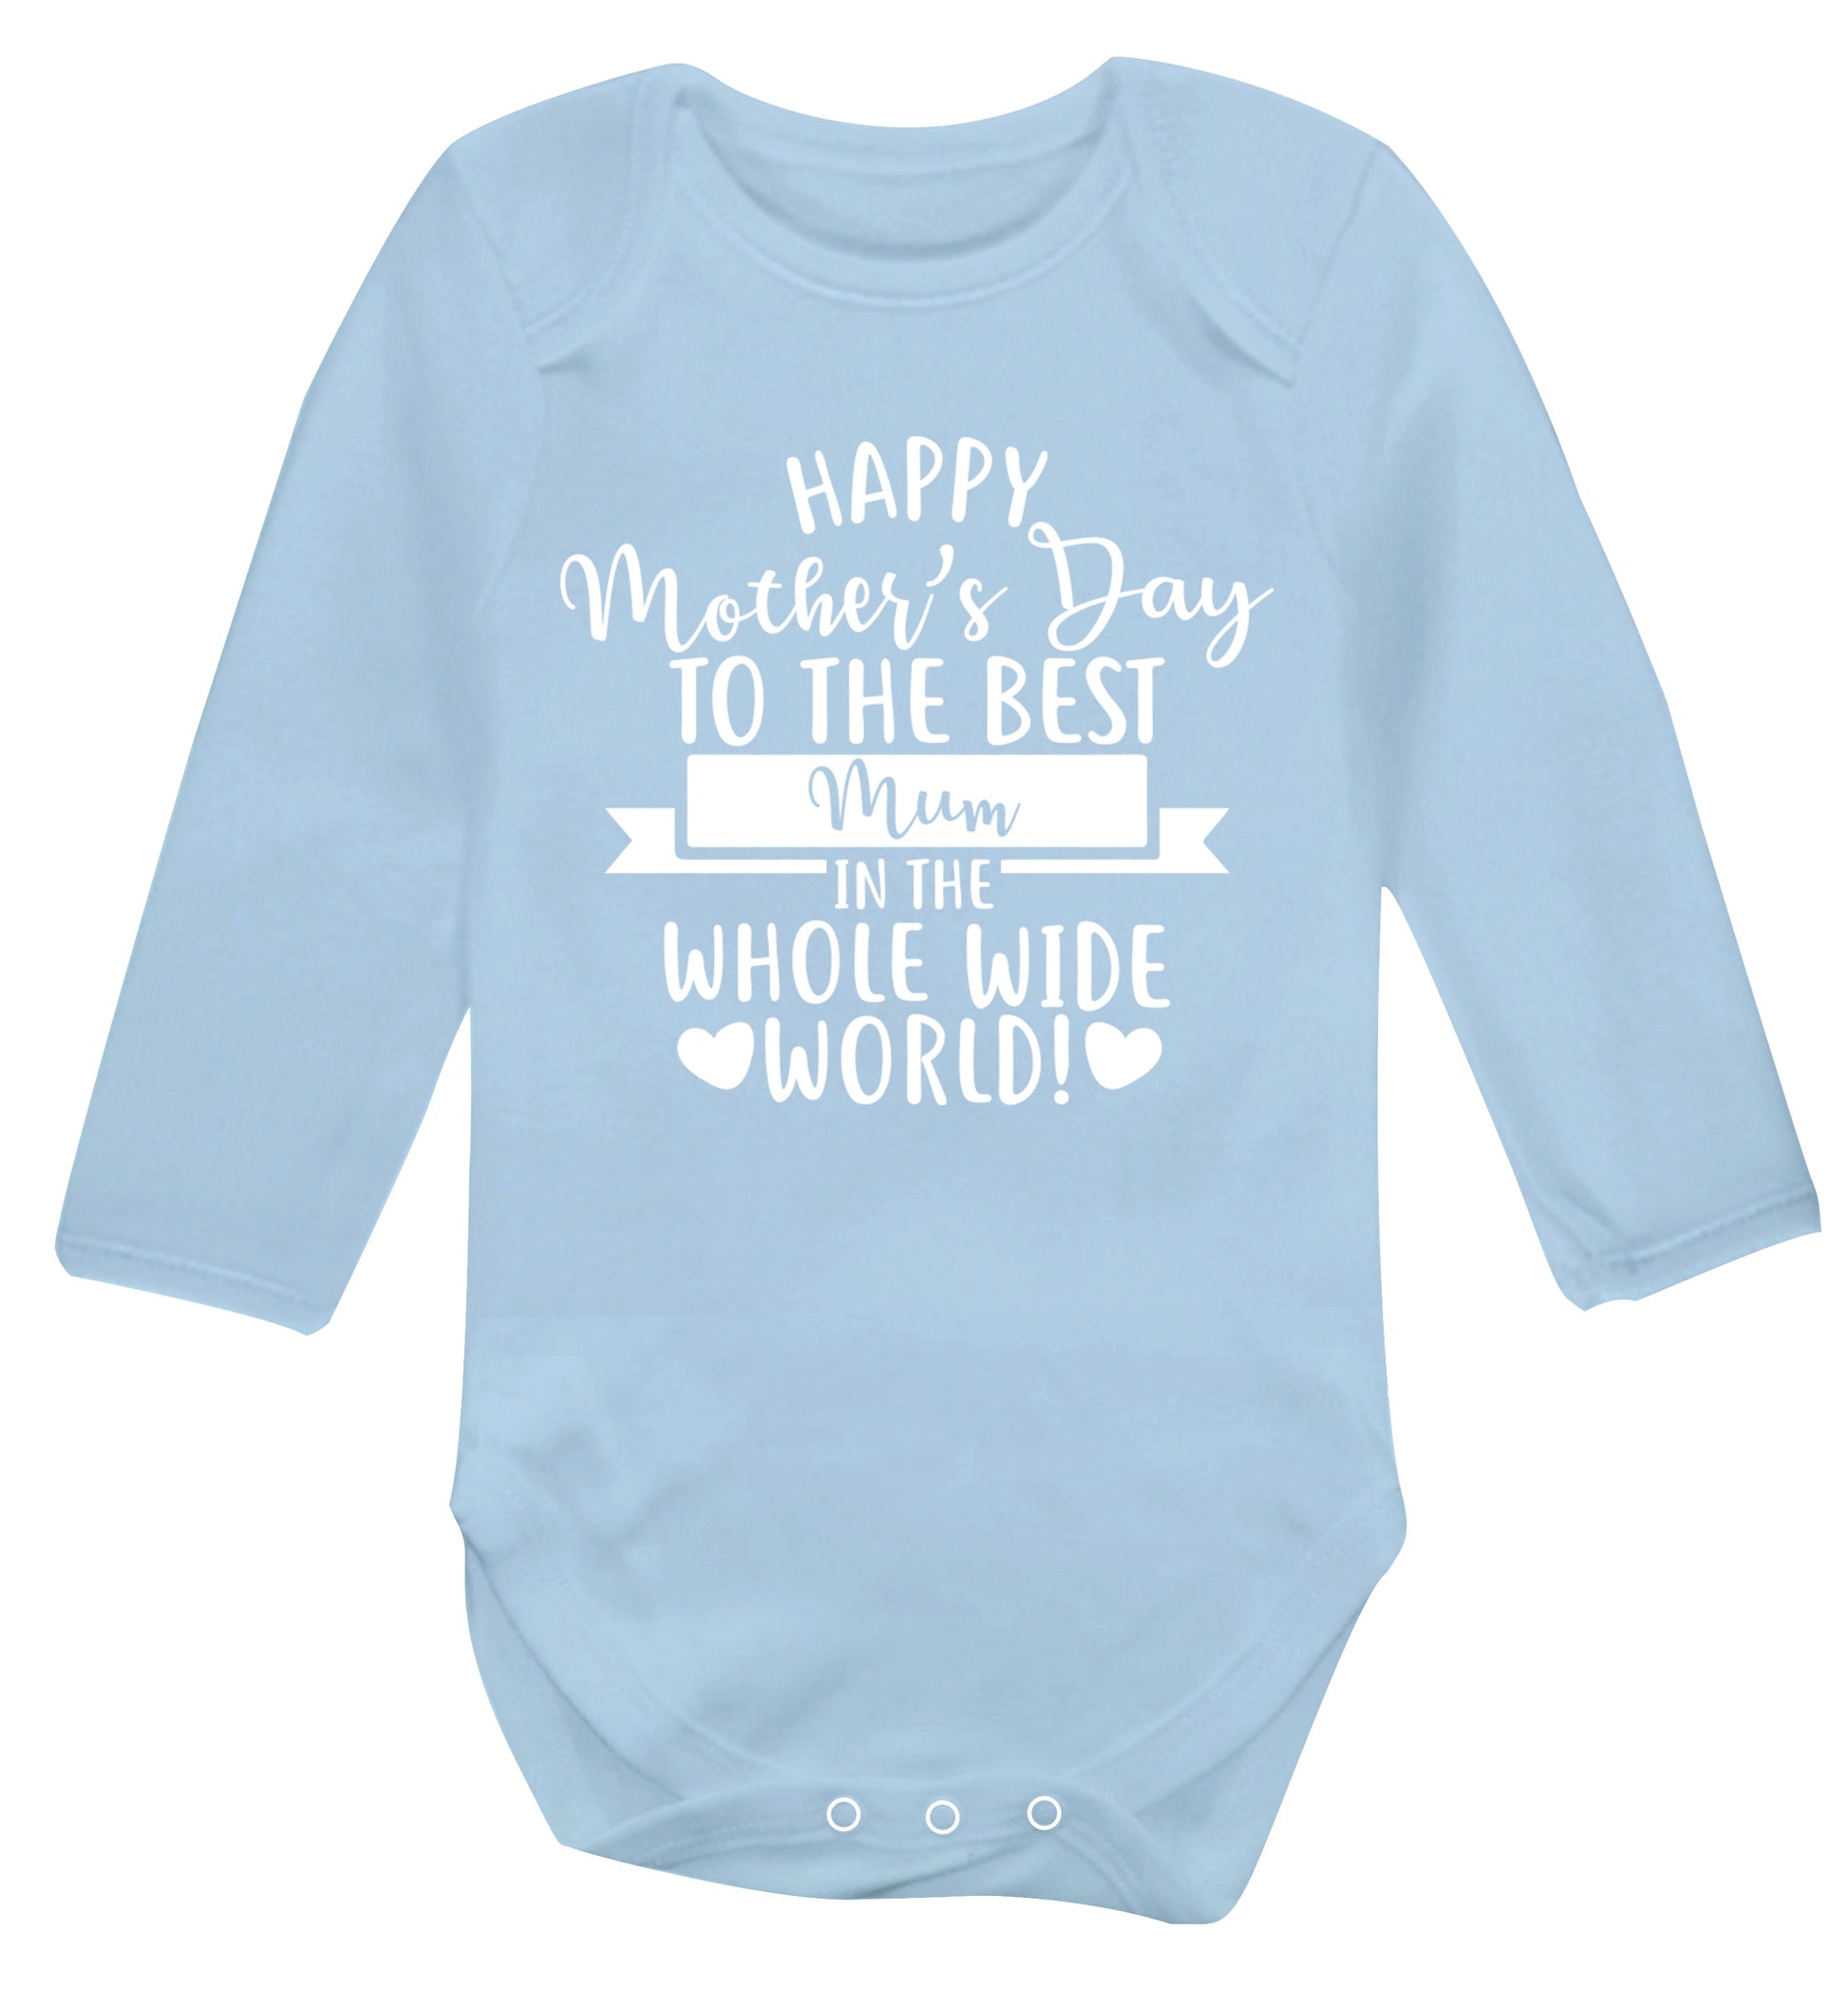 Happy Mother's Day to the best mum in the whole wide world! Baby Vest long sleeved pale blue 6-12 months